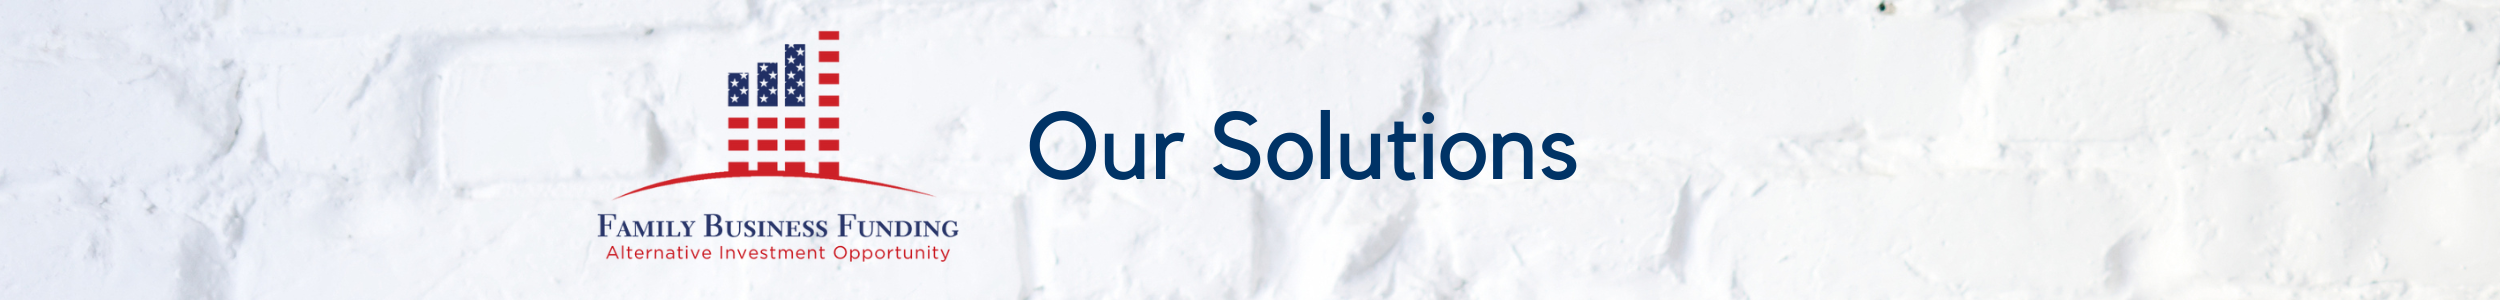 Our Solutions